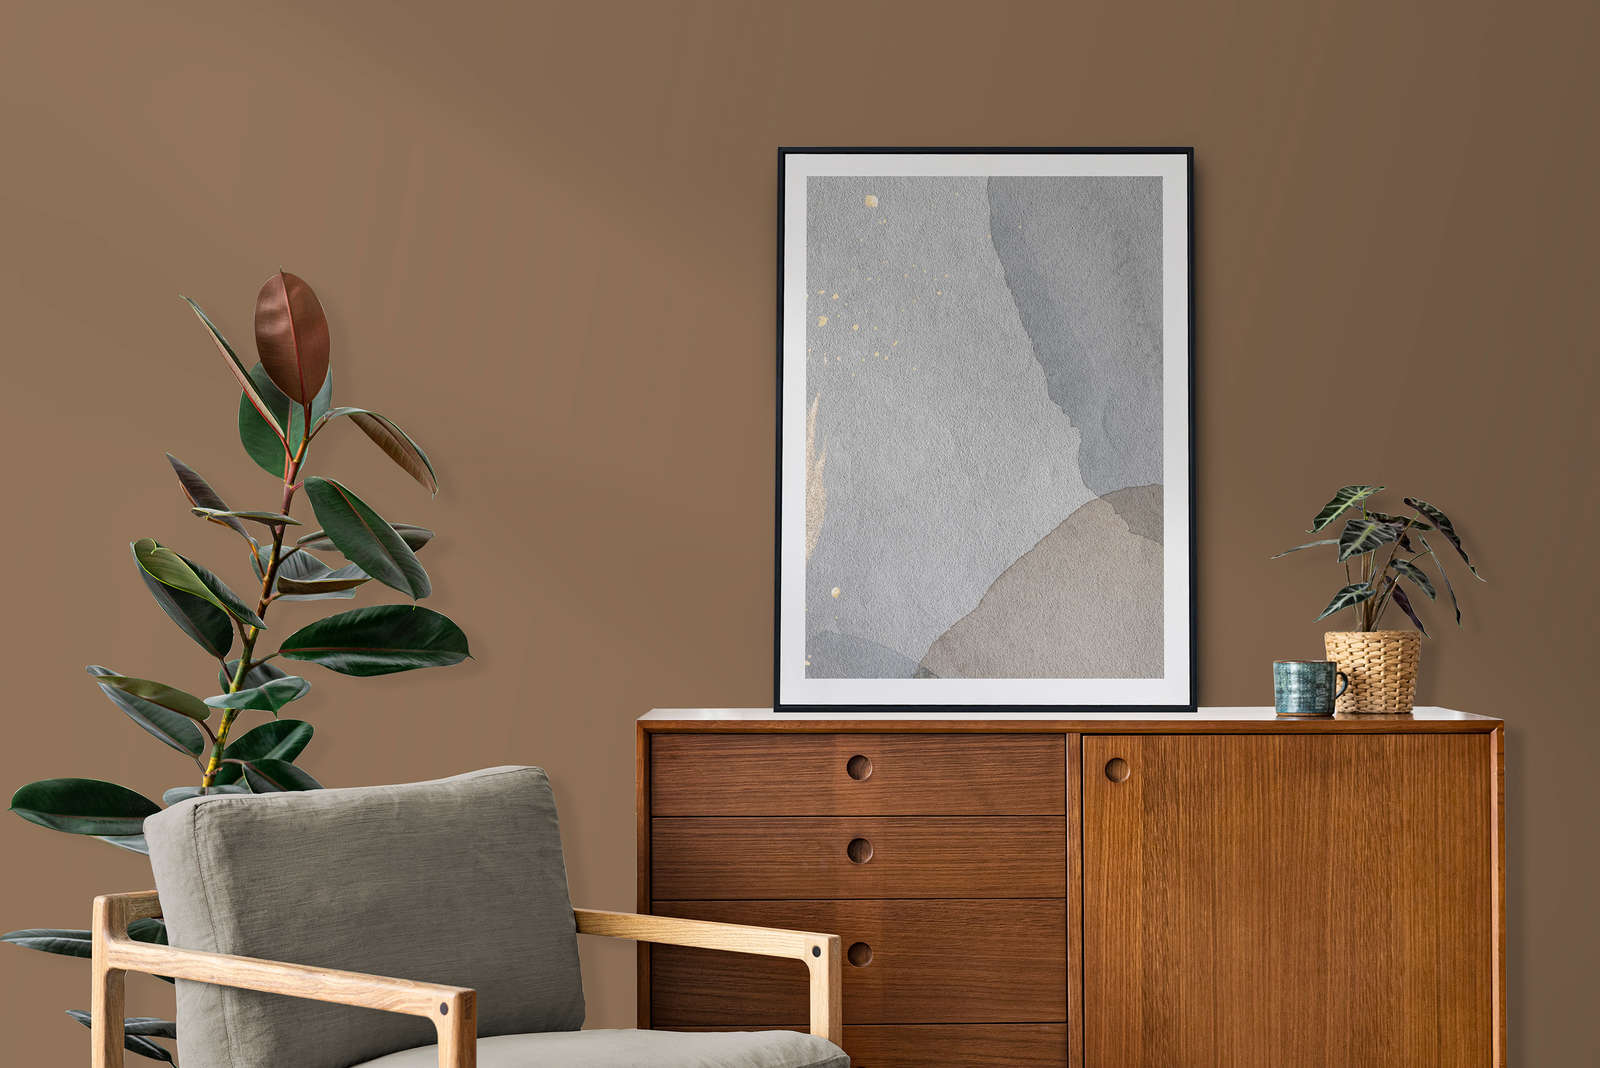             Premium Wall Paint Soothing Light Brown »Modern Mud« NW719 – 5 litre
        